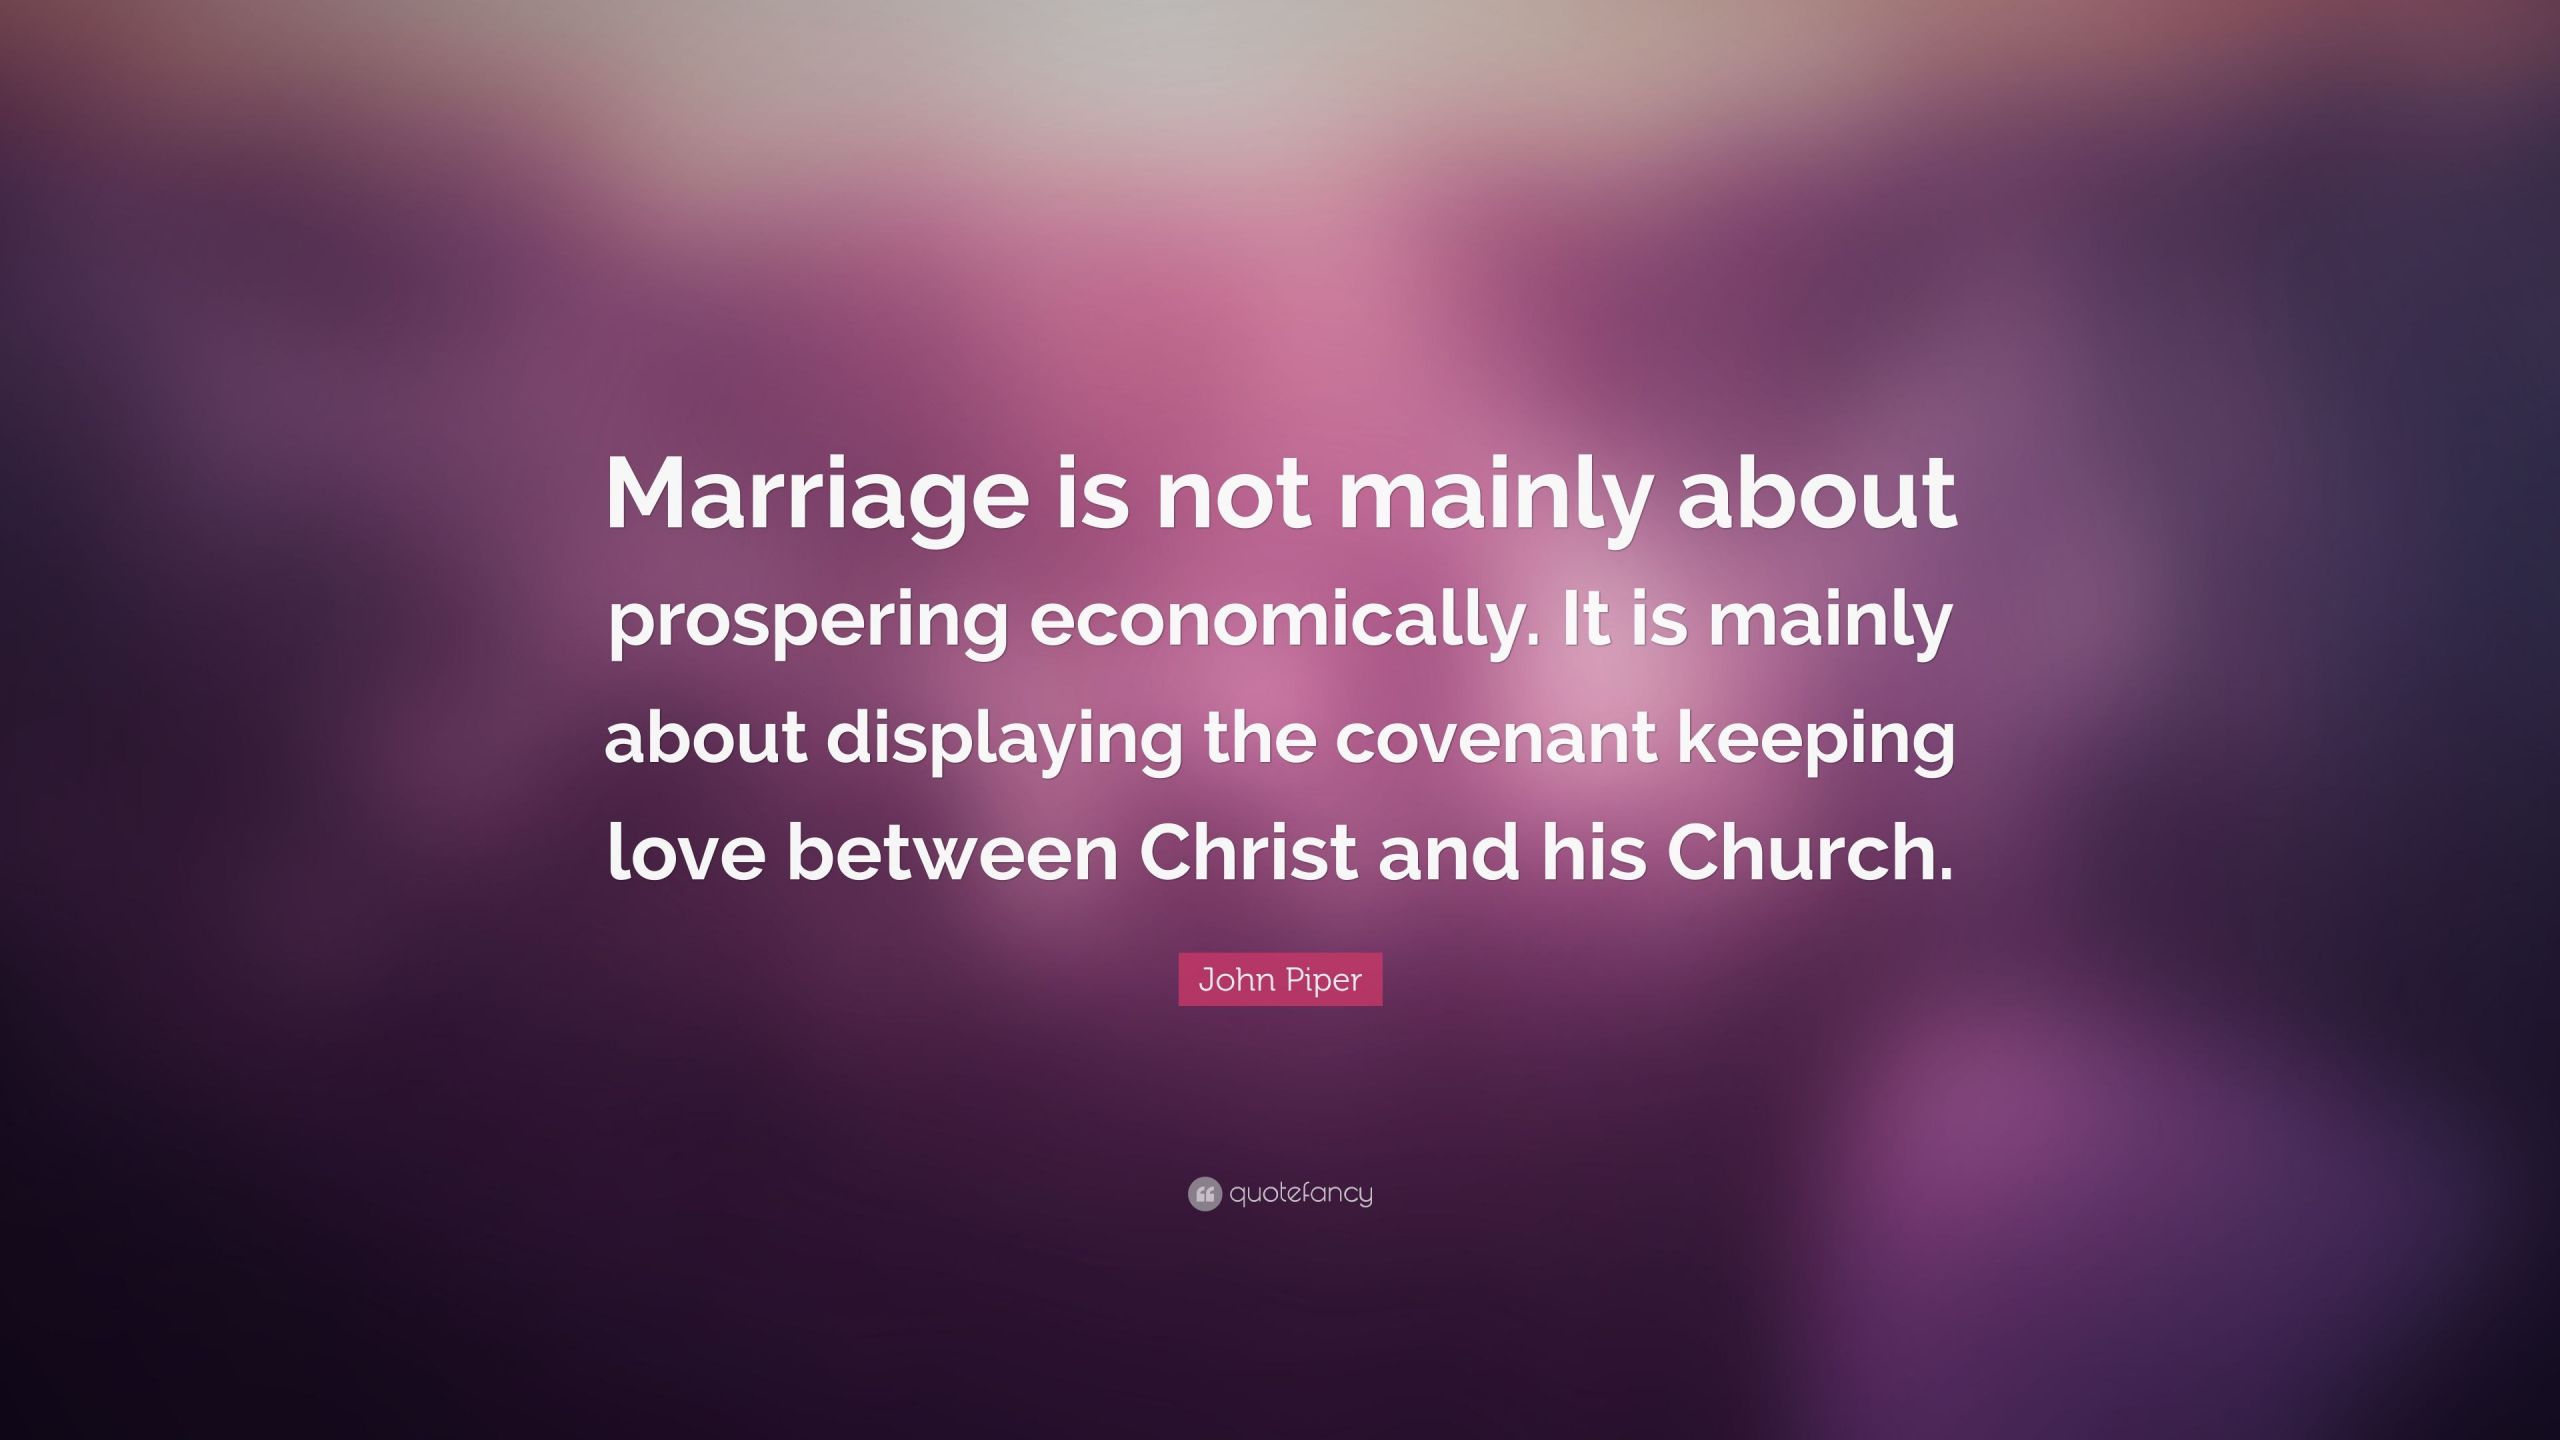 John Piper Marriage Quotes
 John Piper Quote “Marriage is not mainly about prospering